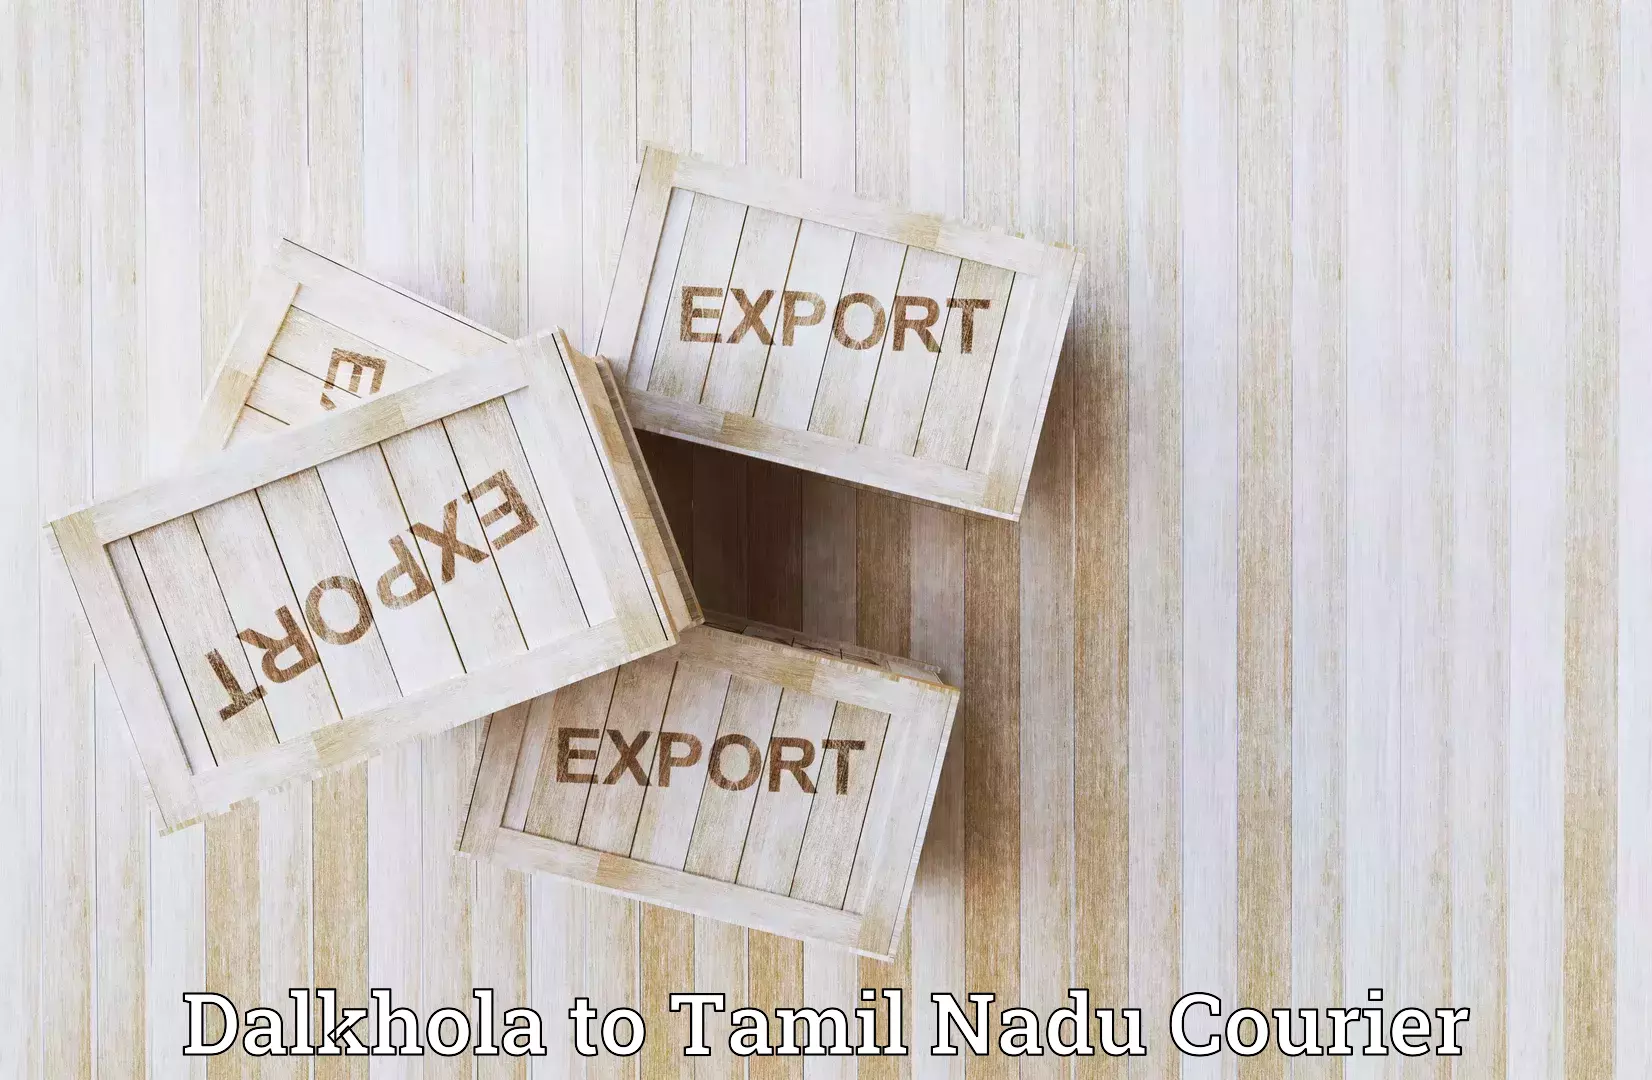 Express delivery capabilities Dalkhola to Kovilpatti